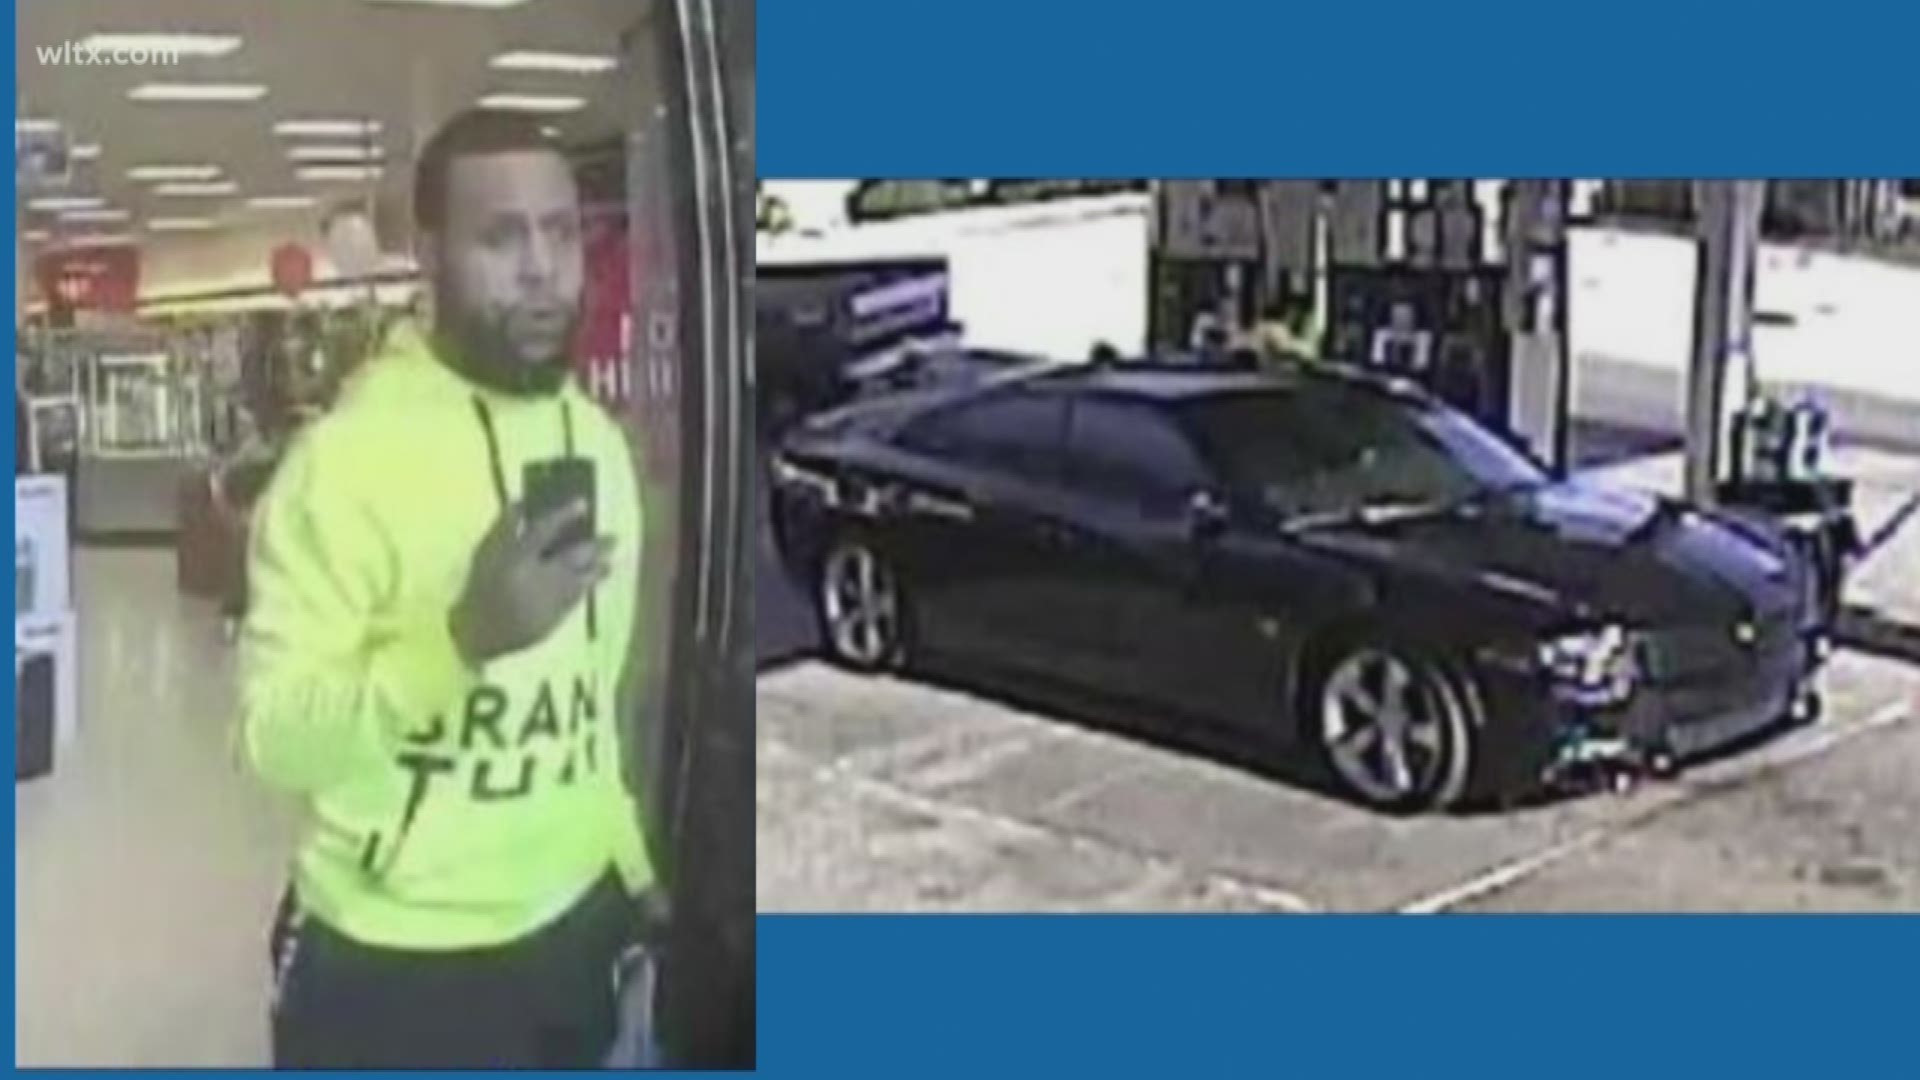 Investigators are looking for a man who used stolen credit cards to go on a shopping spree.